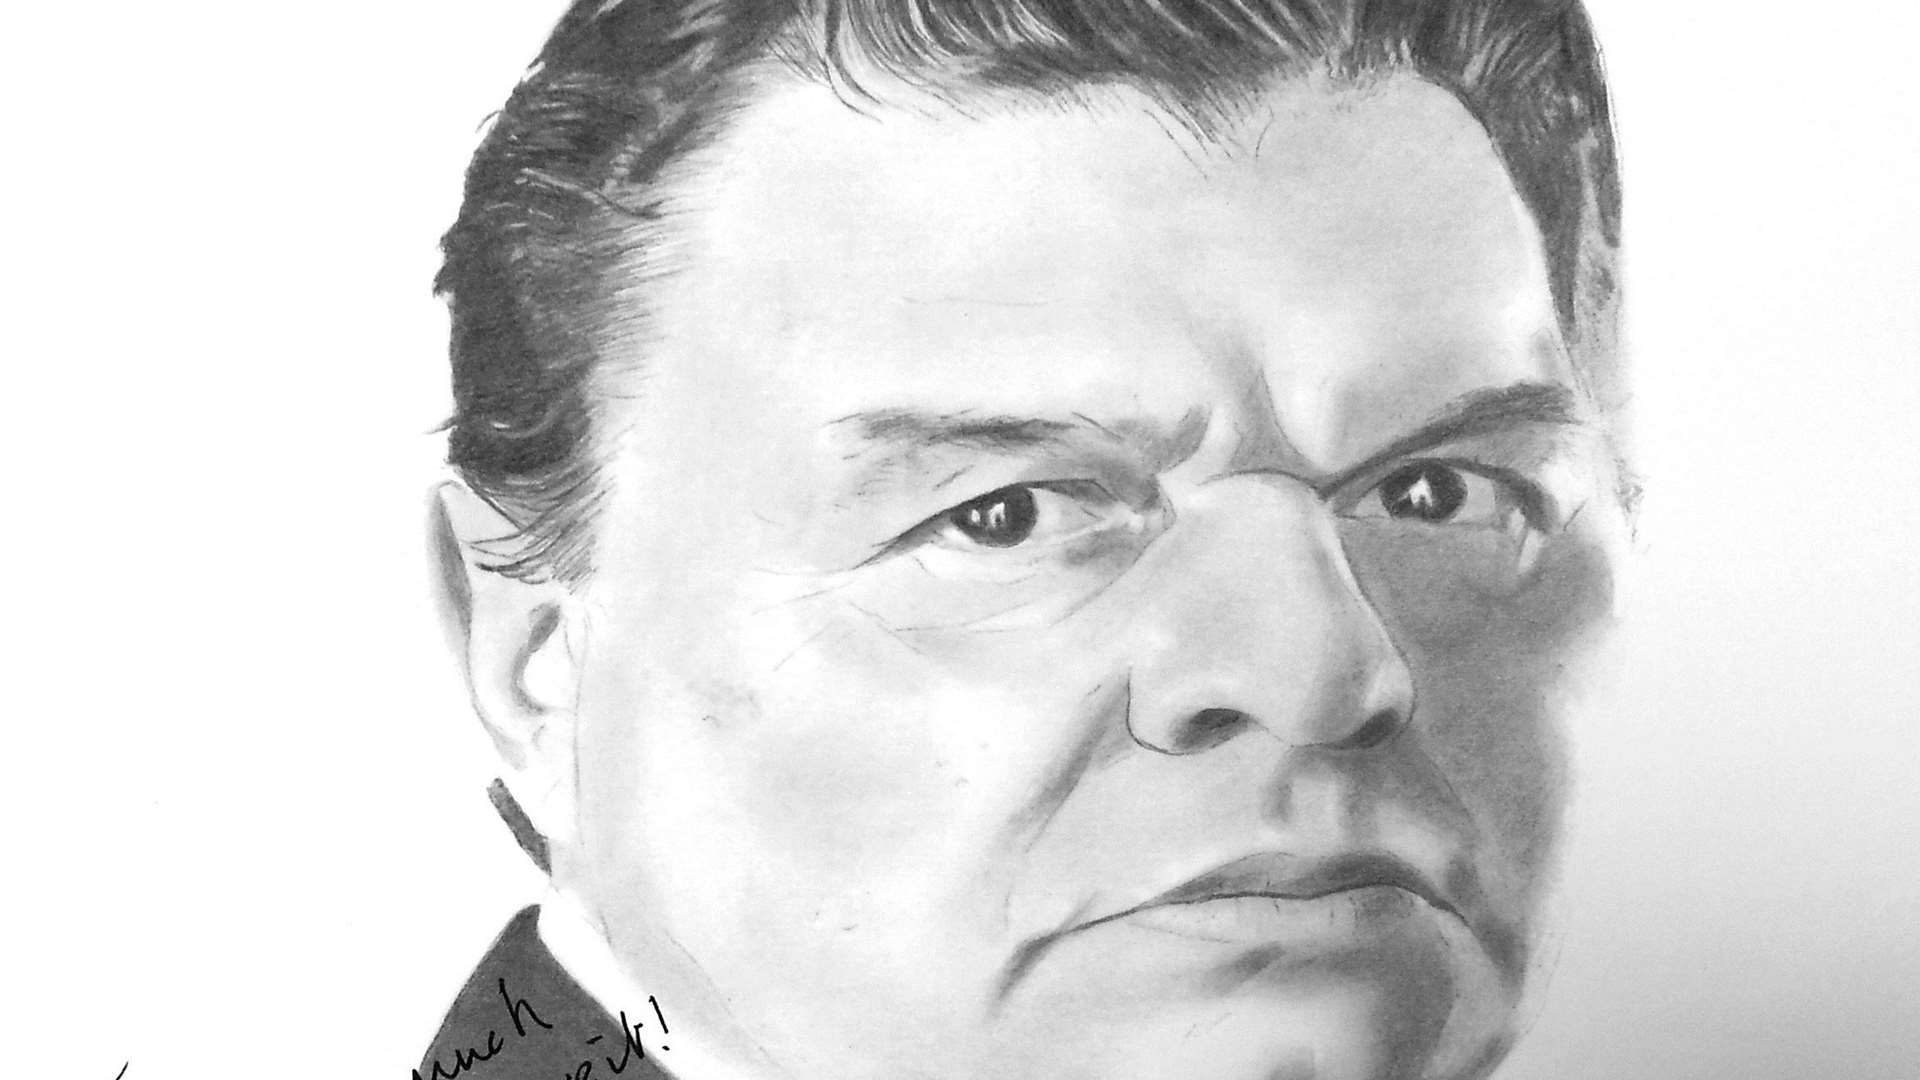 Gravesend panto star Jamie Foreman was delighted with Jay's sketch